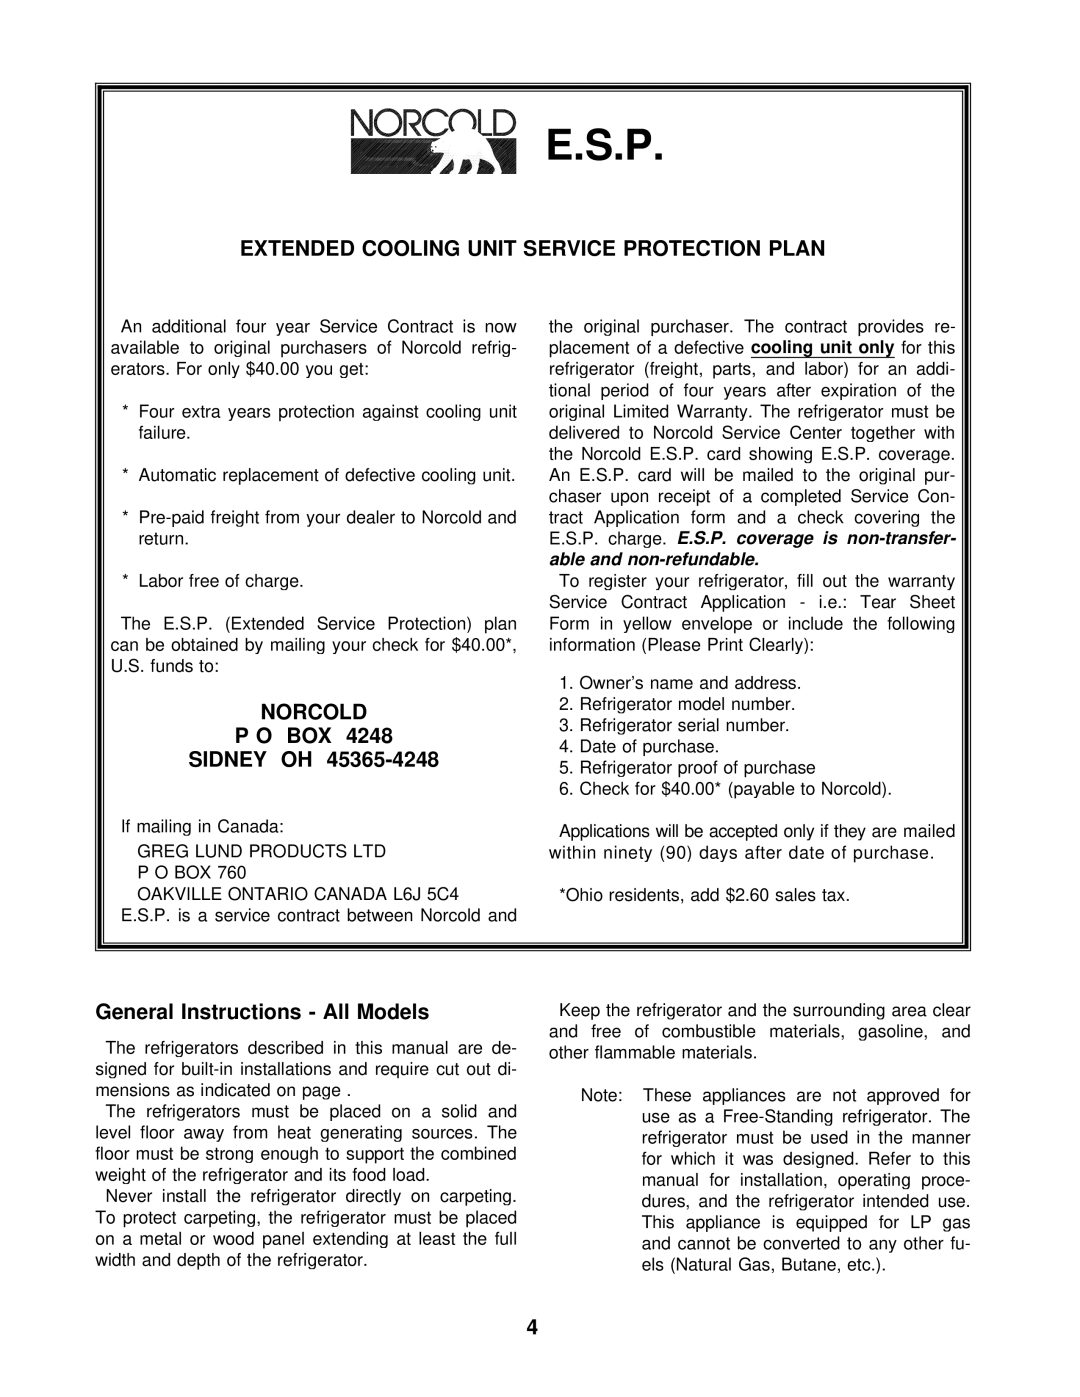 Norcold 443 Extended Cooling Unit Service Protection Plan, Norcold P O Box Sidney Oh, General Instructions - All Models 